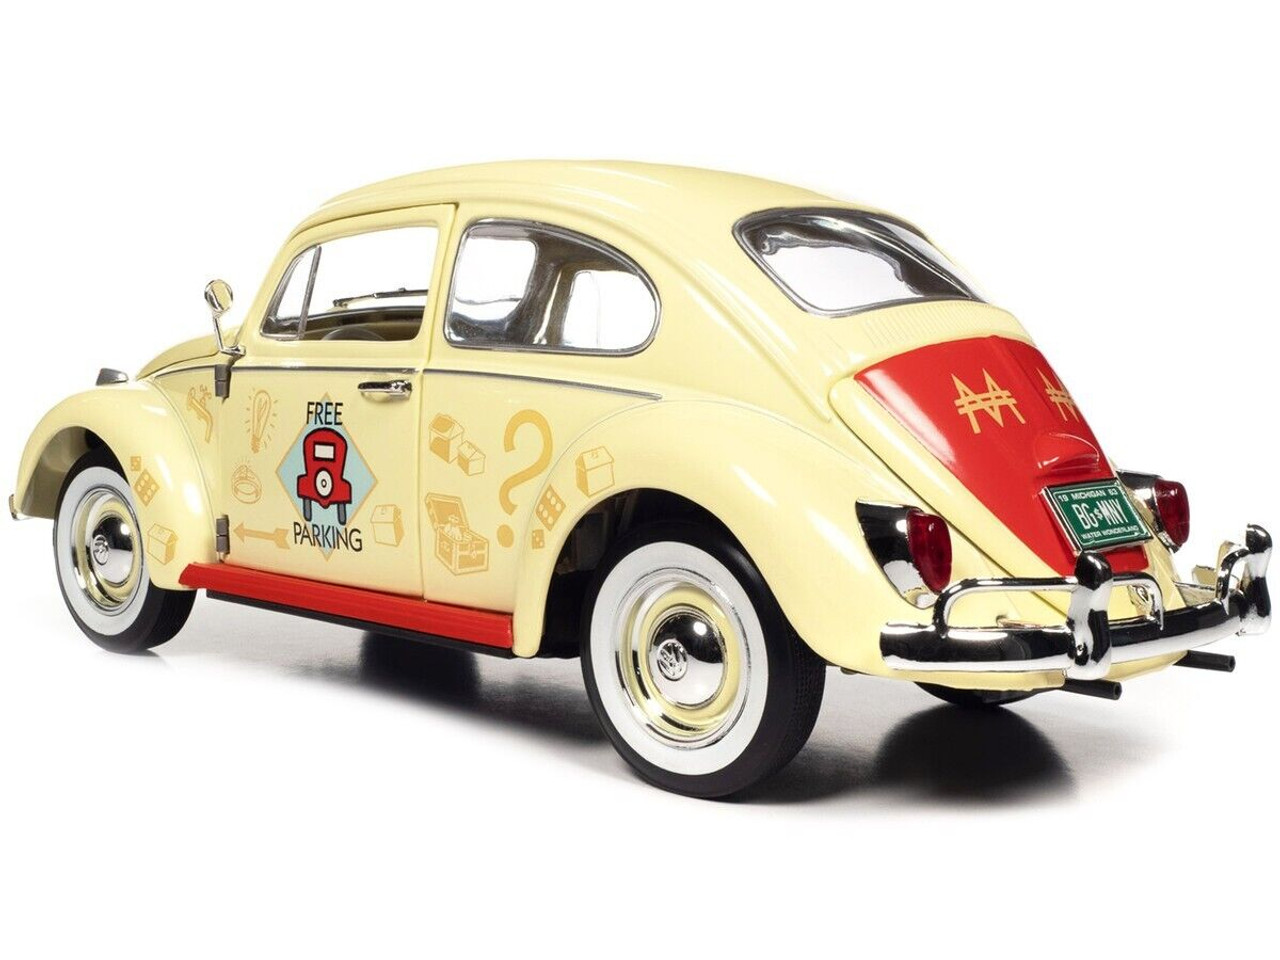 1/18 Auto World 1963 Volkswagen Beetle Yukon Yellow with "Monopoly" Graphics "Free Parking" and Mr. Monopoly Resin Figure Diecast Car Model